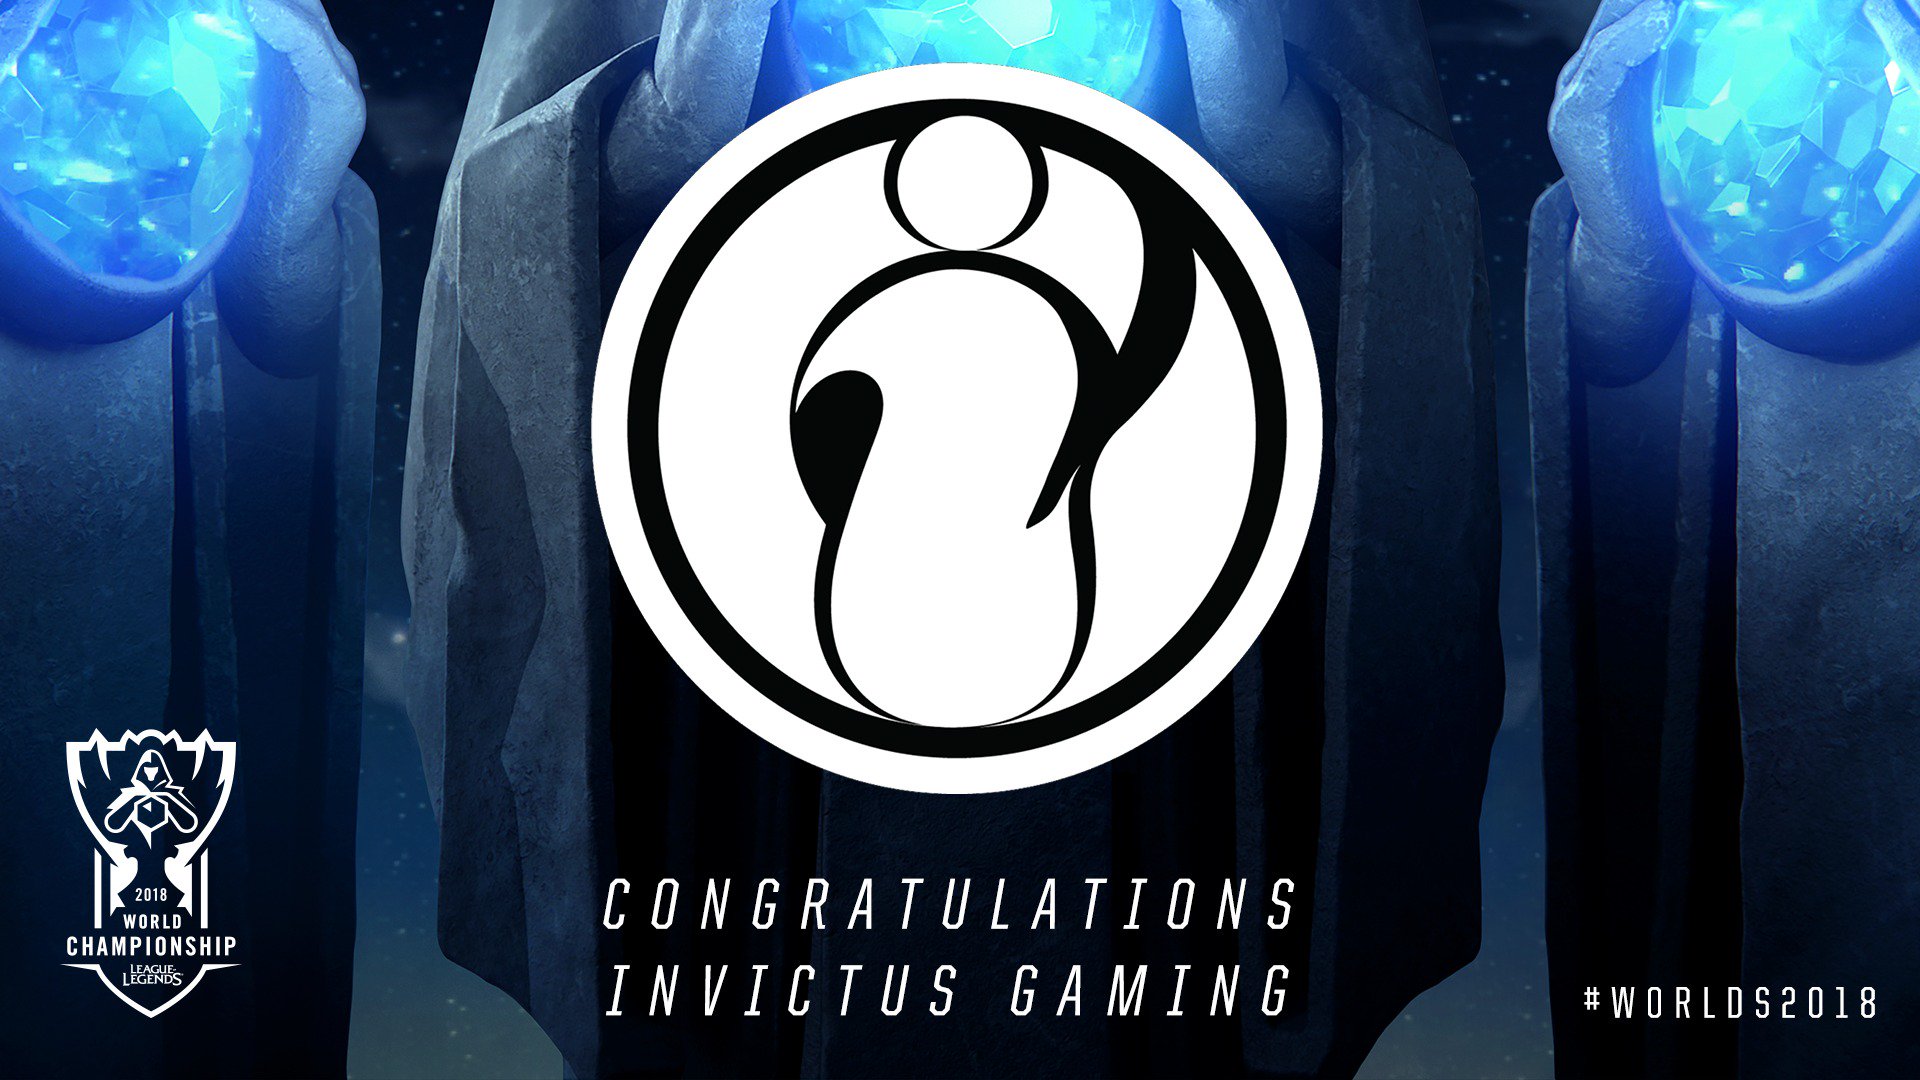 LoL Esports on Twitter Congratulations to Invictus Gaming on 1920x1080